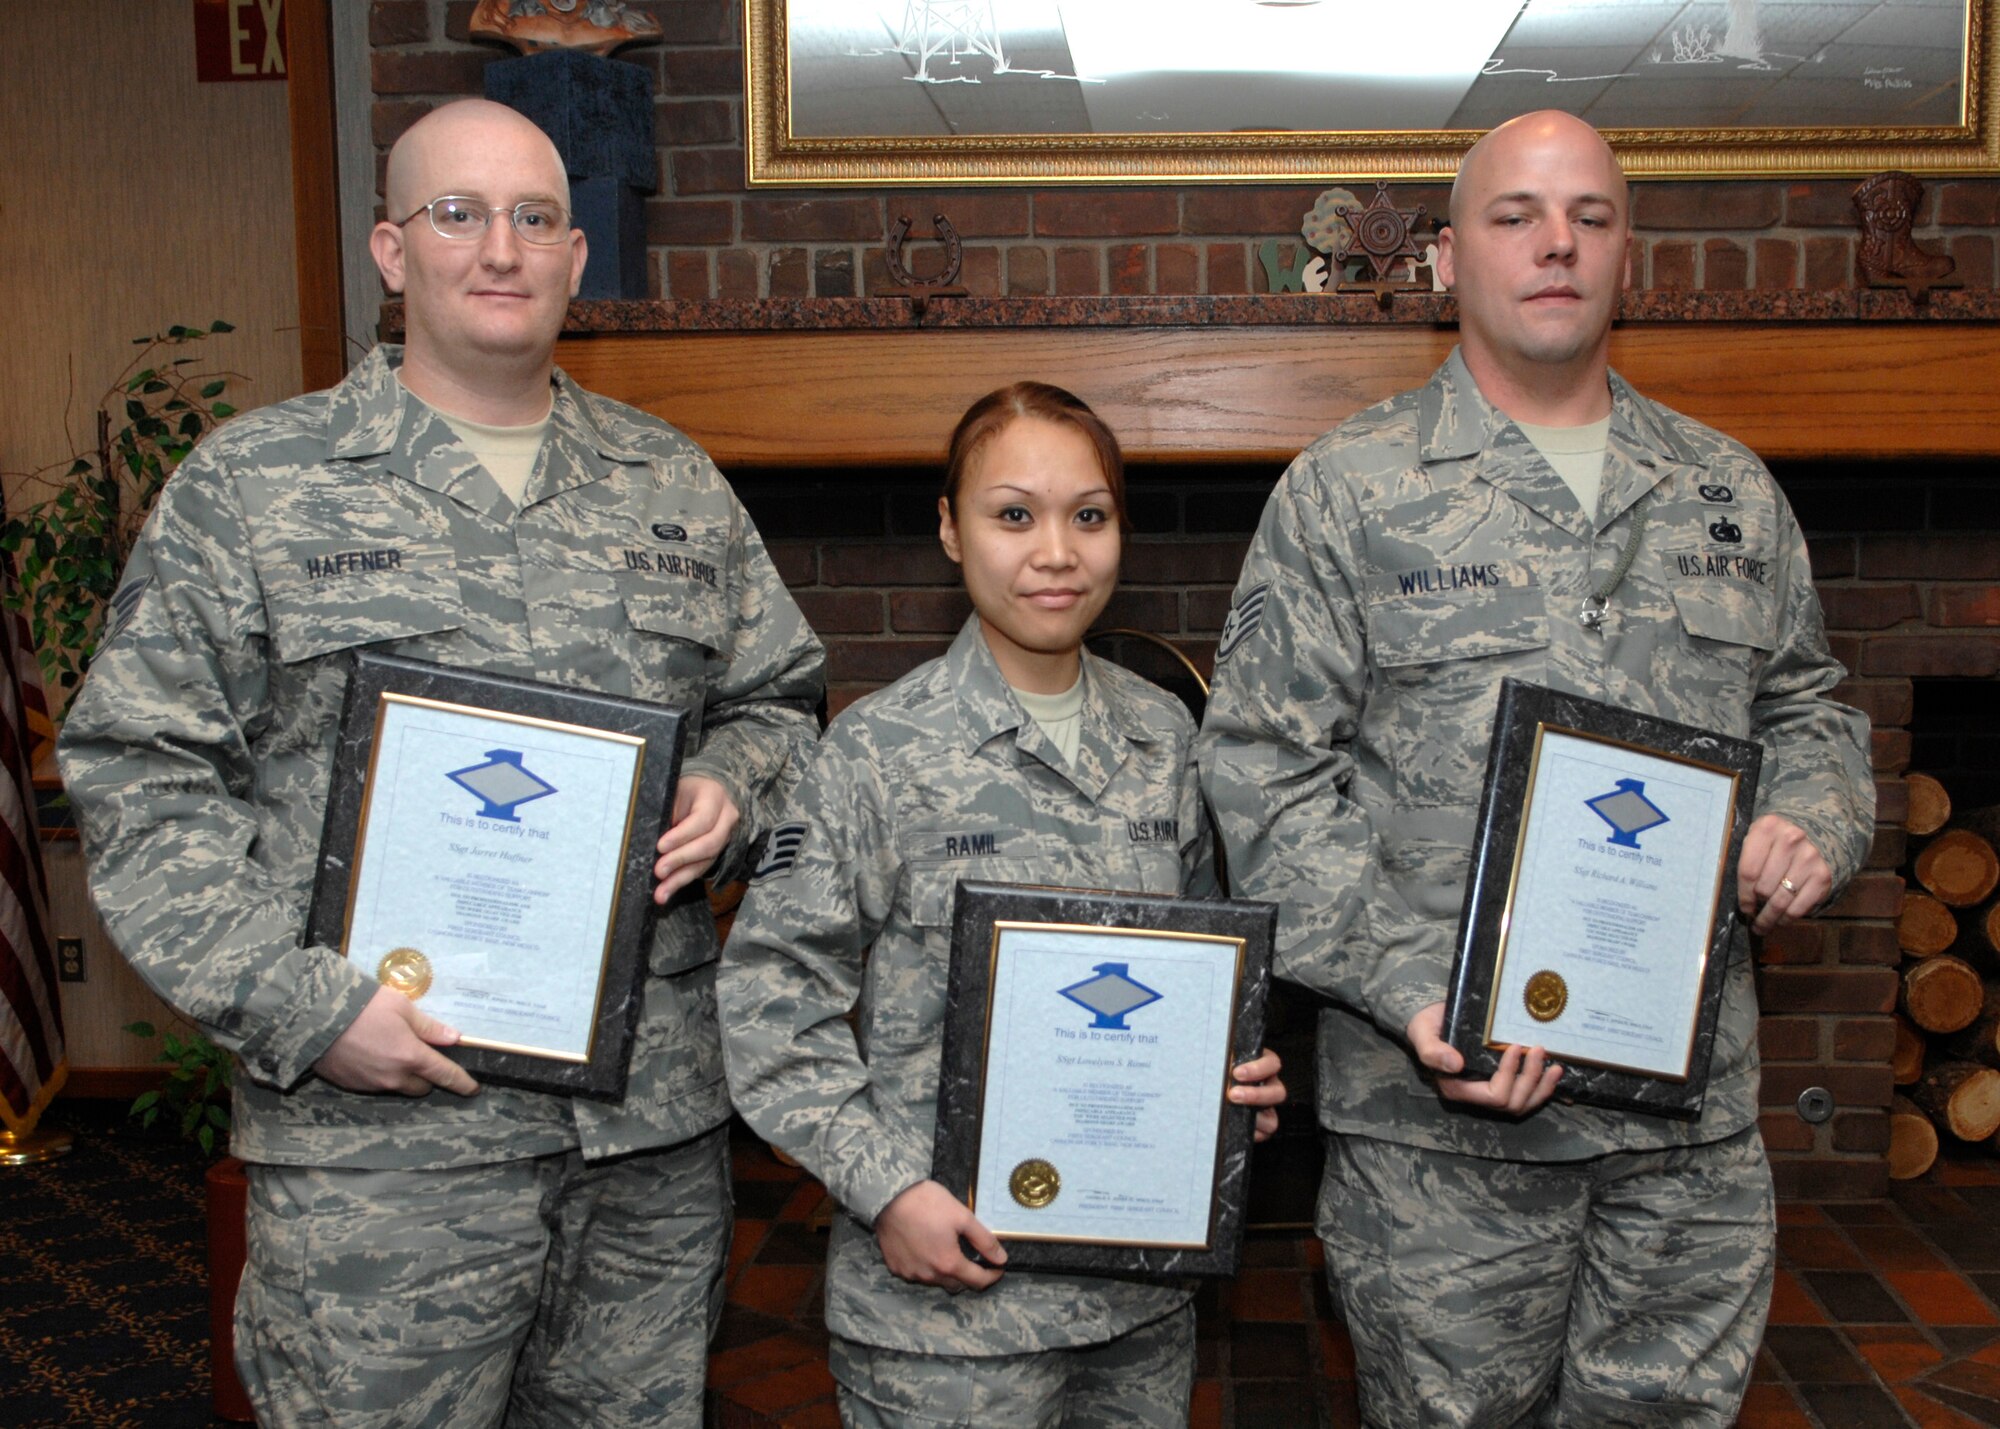 CANNON AIR FORCE BASE, N.M. - (left to right) Staff Sgt. Jarret Haffner, 27th Special Operations Maintenance Operations Squadron, Staff Sgt. Lovelynn Ramil, 27th Special Operations Comptroller Squadron, and Staff Sgt. Richard Williams, 27th Special Operations Wing Public Affairs, present their Diamond Sharp award. The Diamond Sharp awards ceremony was held at the Pecos Trail Dining Facility Jan. 25. (U.S. Air Force photo by Airman 1st Class Erik Cardenas)